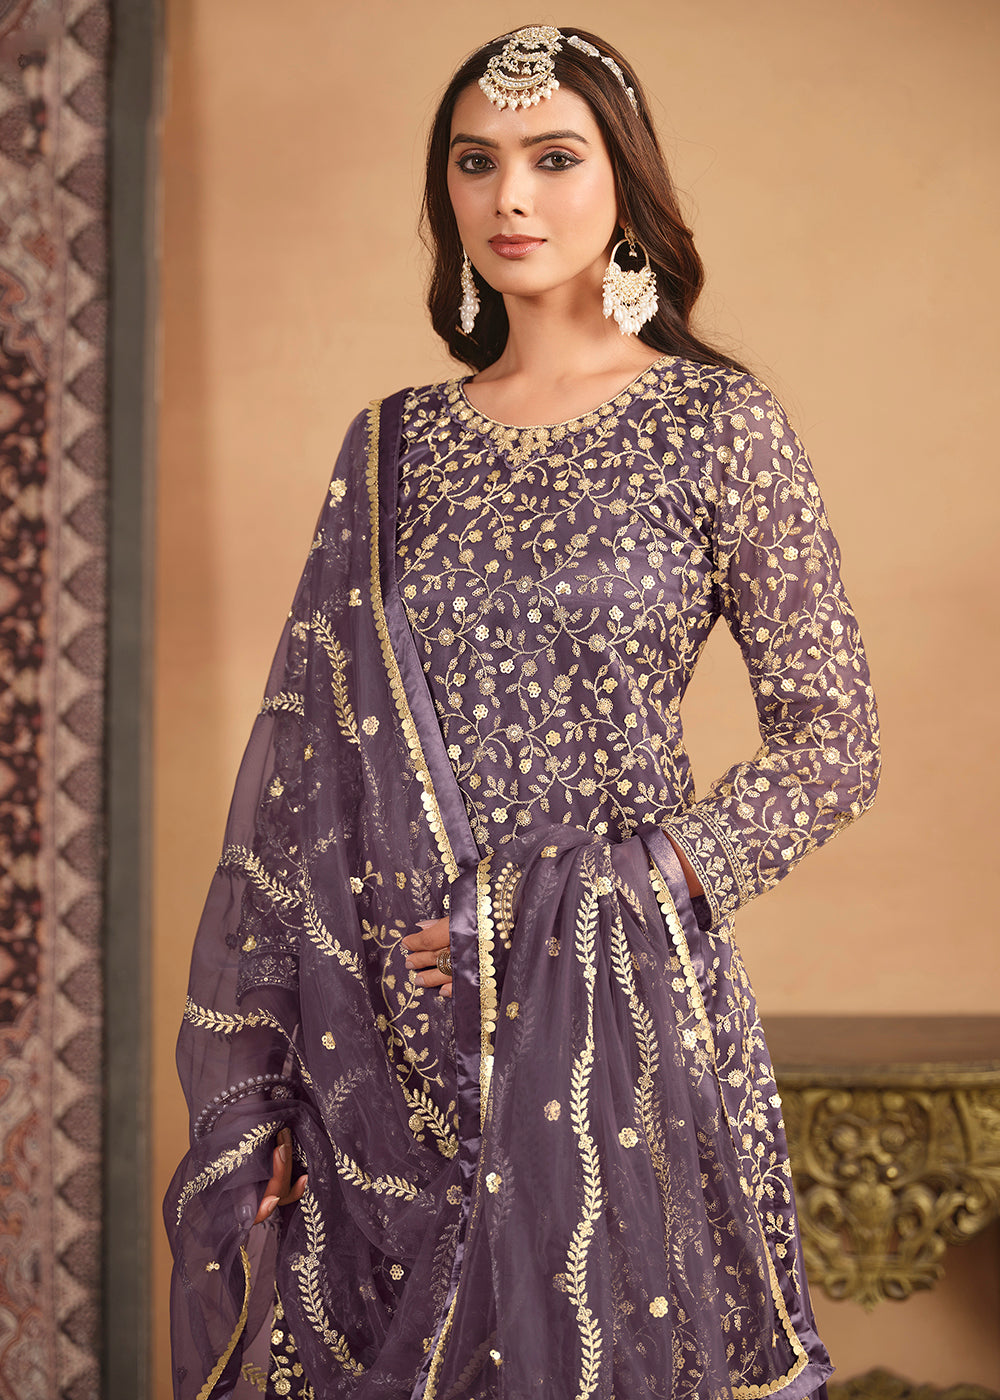 Shop Now Net Dusty Purple Embroidered Gharara Style Suit Online at Empress Clothing in USA, UK, Canada, Italy & Worldwide.